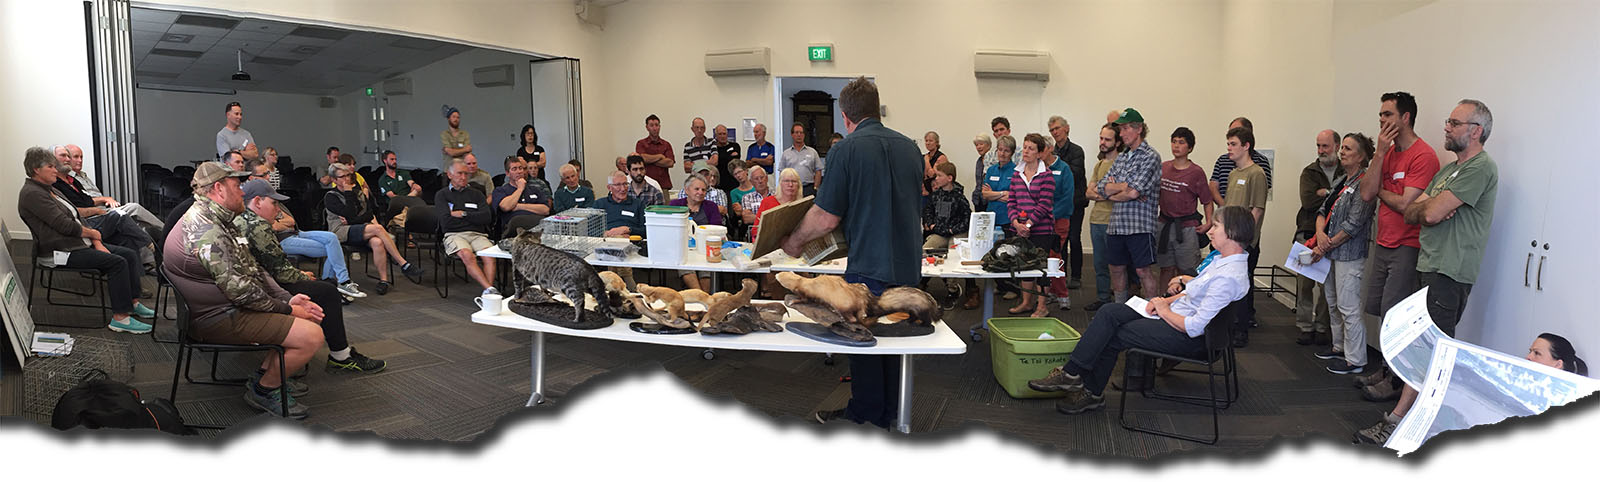 Fig. 3: Greg Brynes from Tuhaitara Coastal Park running a trapping workshop at Woodend. Trapping ‘roadshows’ around the country attract hundreds of people of all ages and demographics, all wanting to be part of the most ambitious conservation project on Earth. (Image: S. Whitelaw)